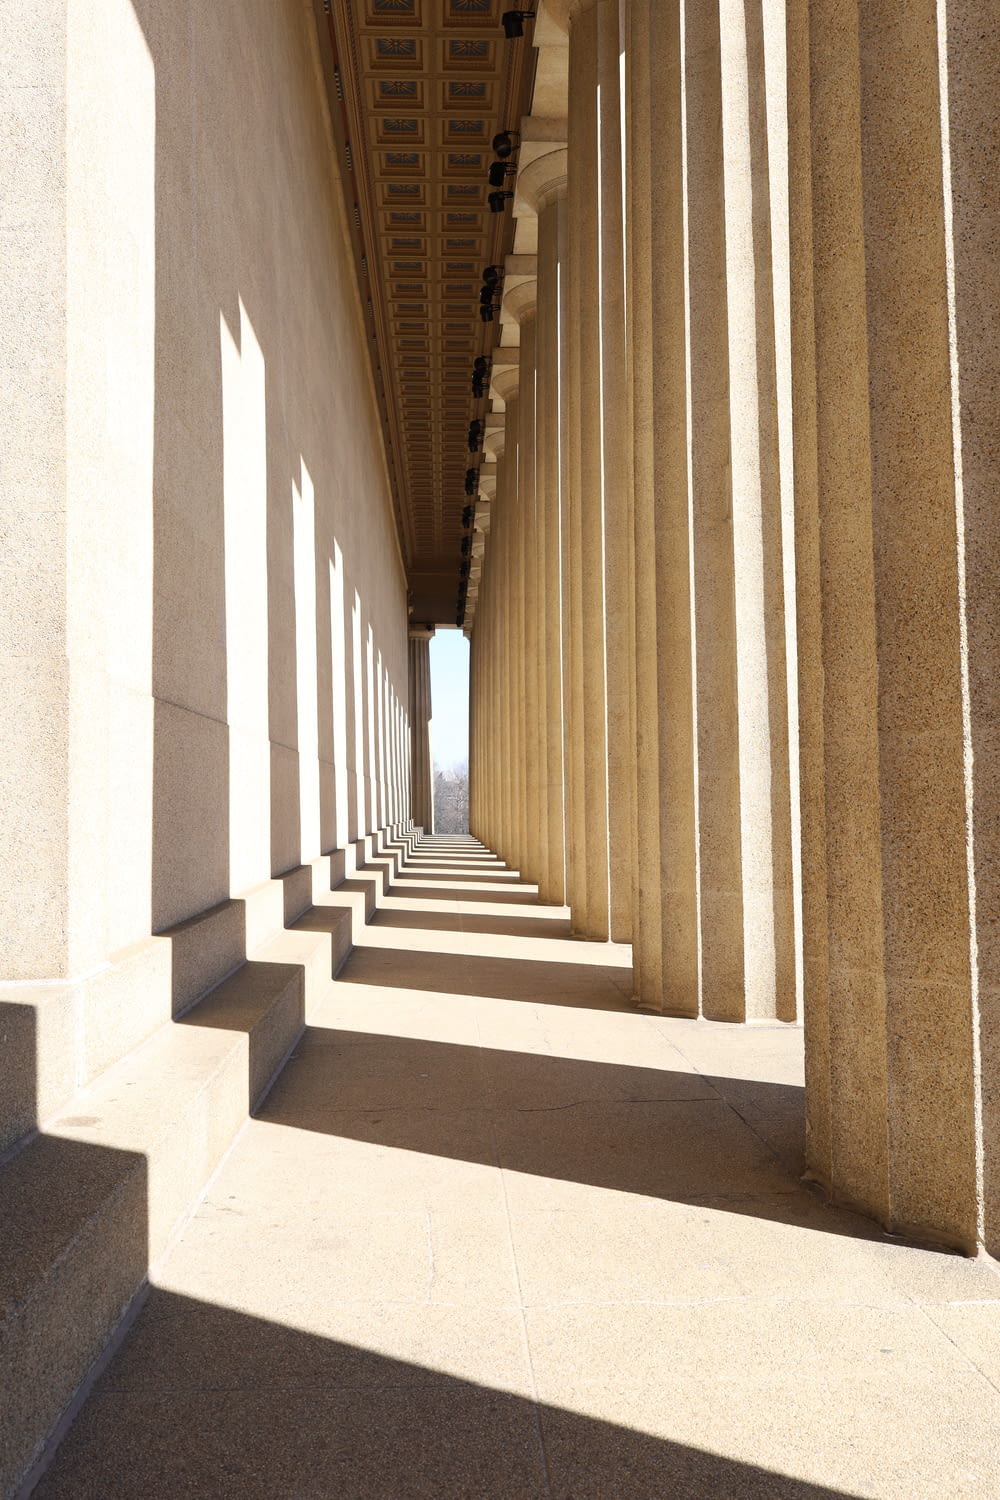 a long row of columns on the side of a building